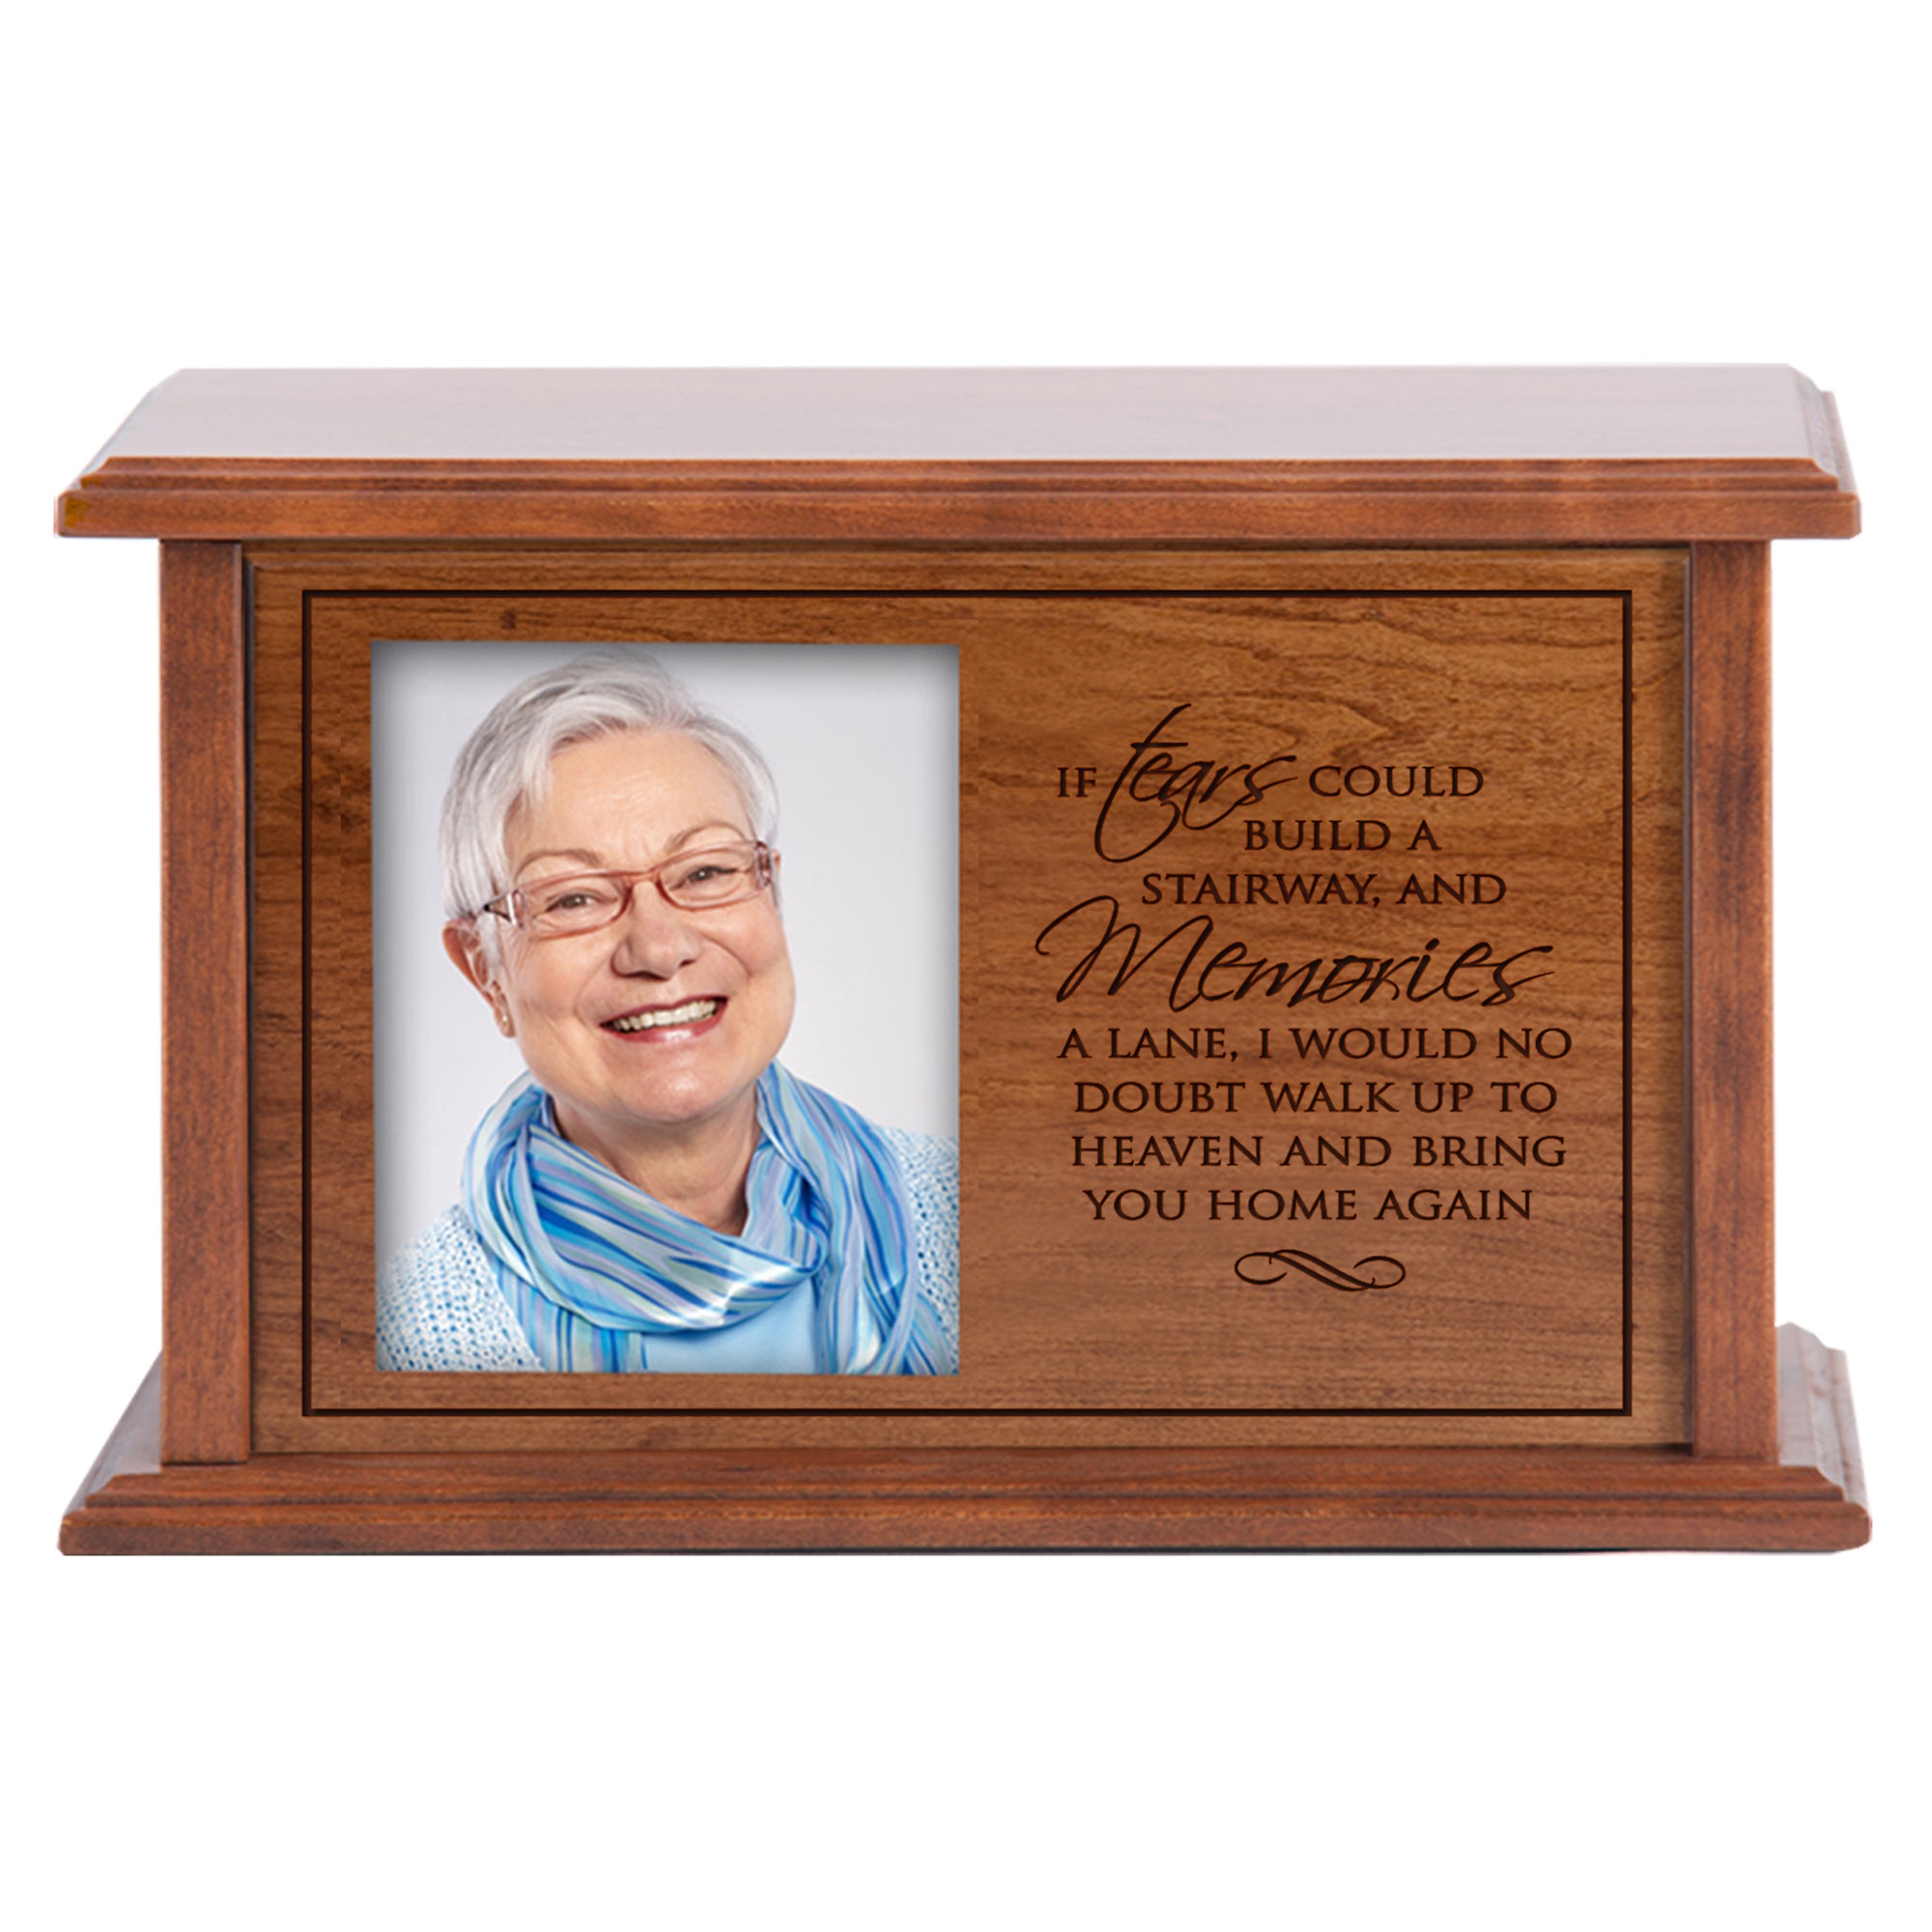 LifeSong Milestones Personalized Cremation Urn for Adult Humans With 4x5 Photo Medium Cherry Finish Wooden Adult Urns For Human Ashes - 10.5 x 7.5 x 6.5